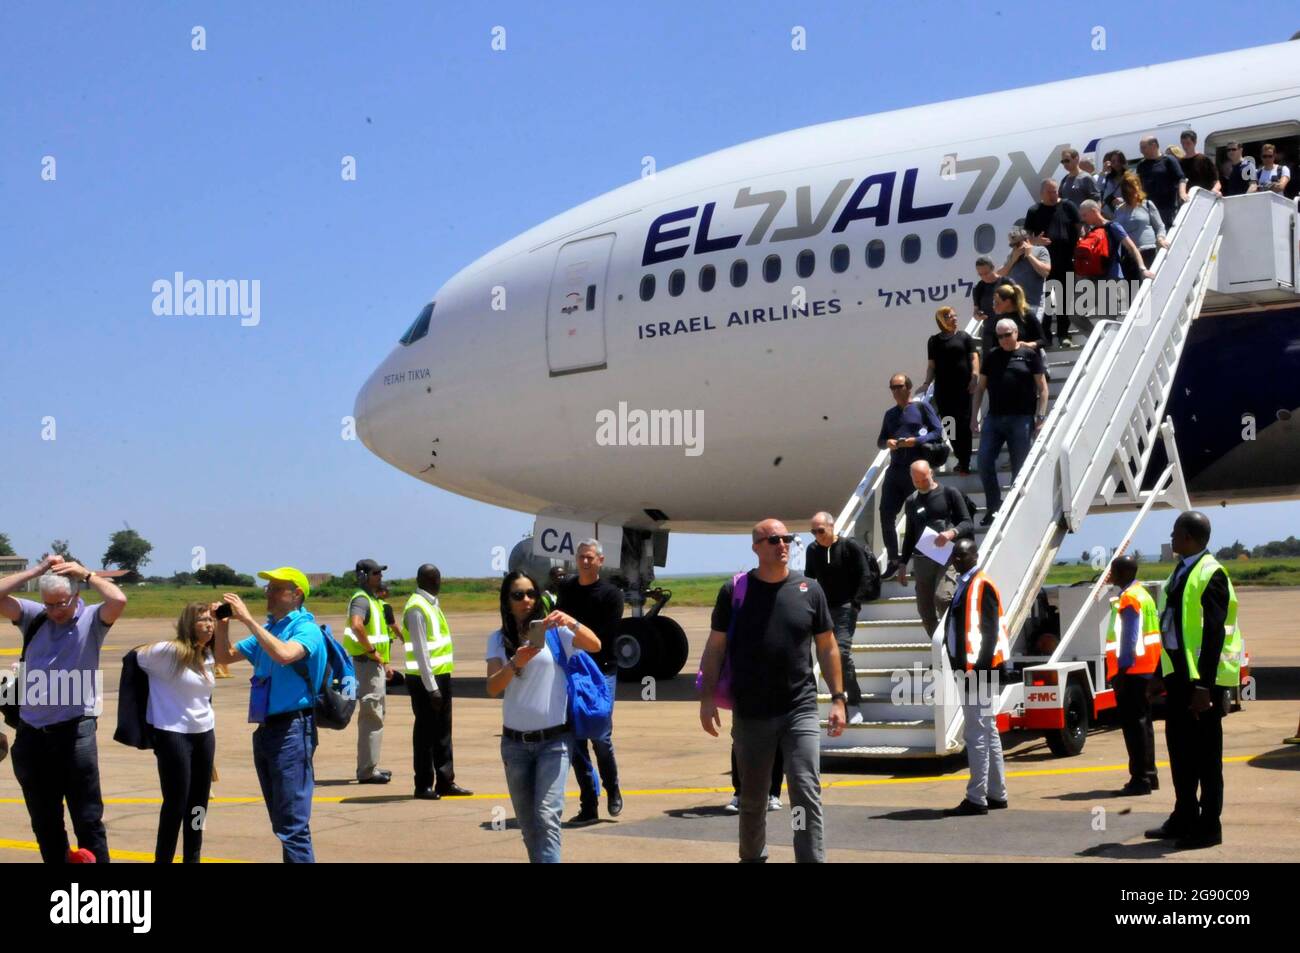 A historic moment of an Israel airplane at the Uganda Entebbe airport after 42 years. This airport was destroyed by Israel forces in 1977. The photo was captured on 13th July 2019 when over 300 tourist came to tour the country. Uganda. Stock Photo